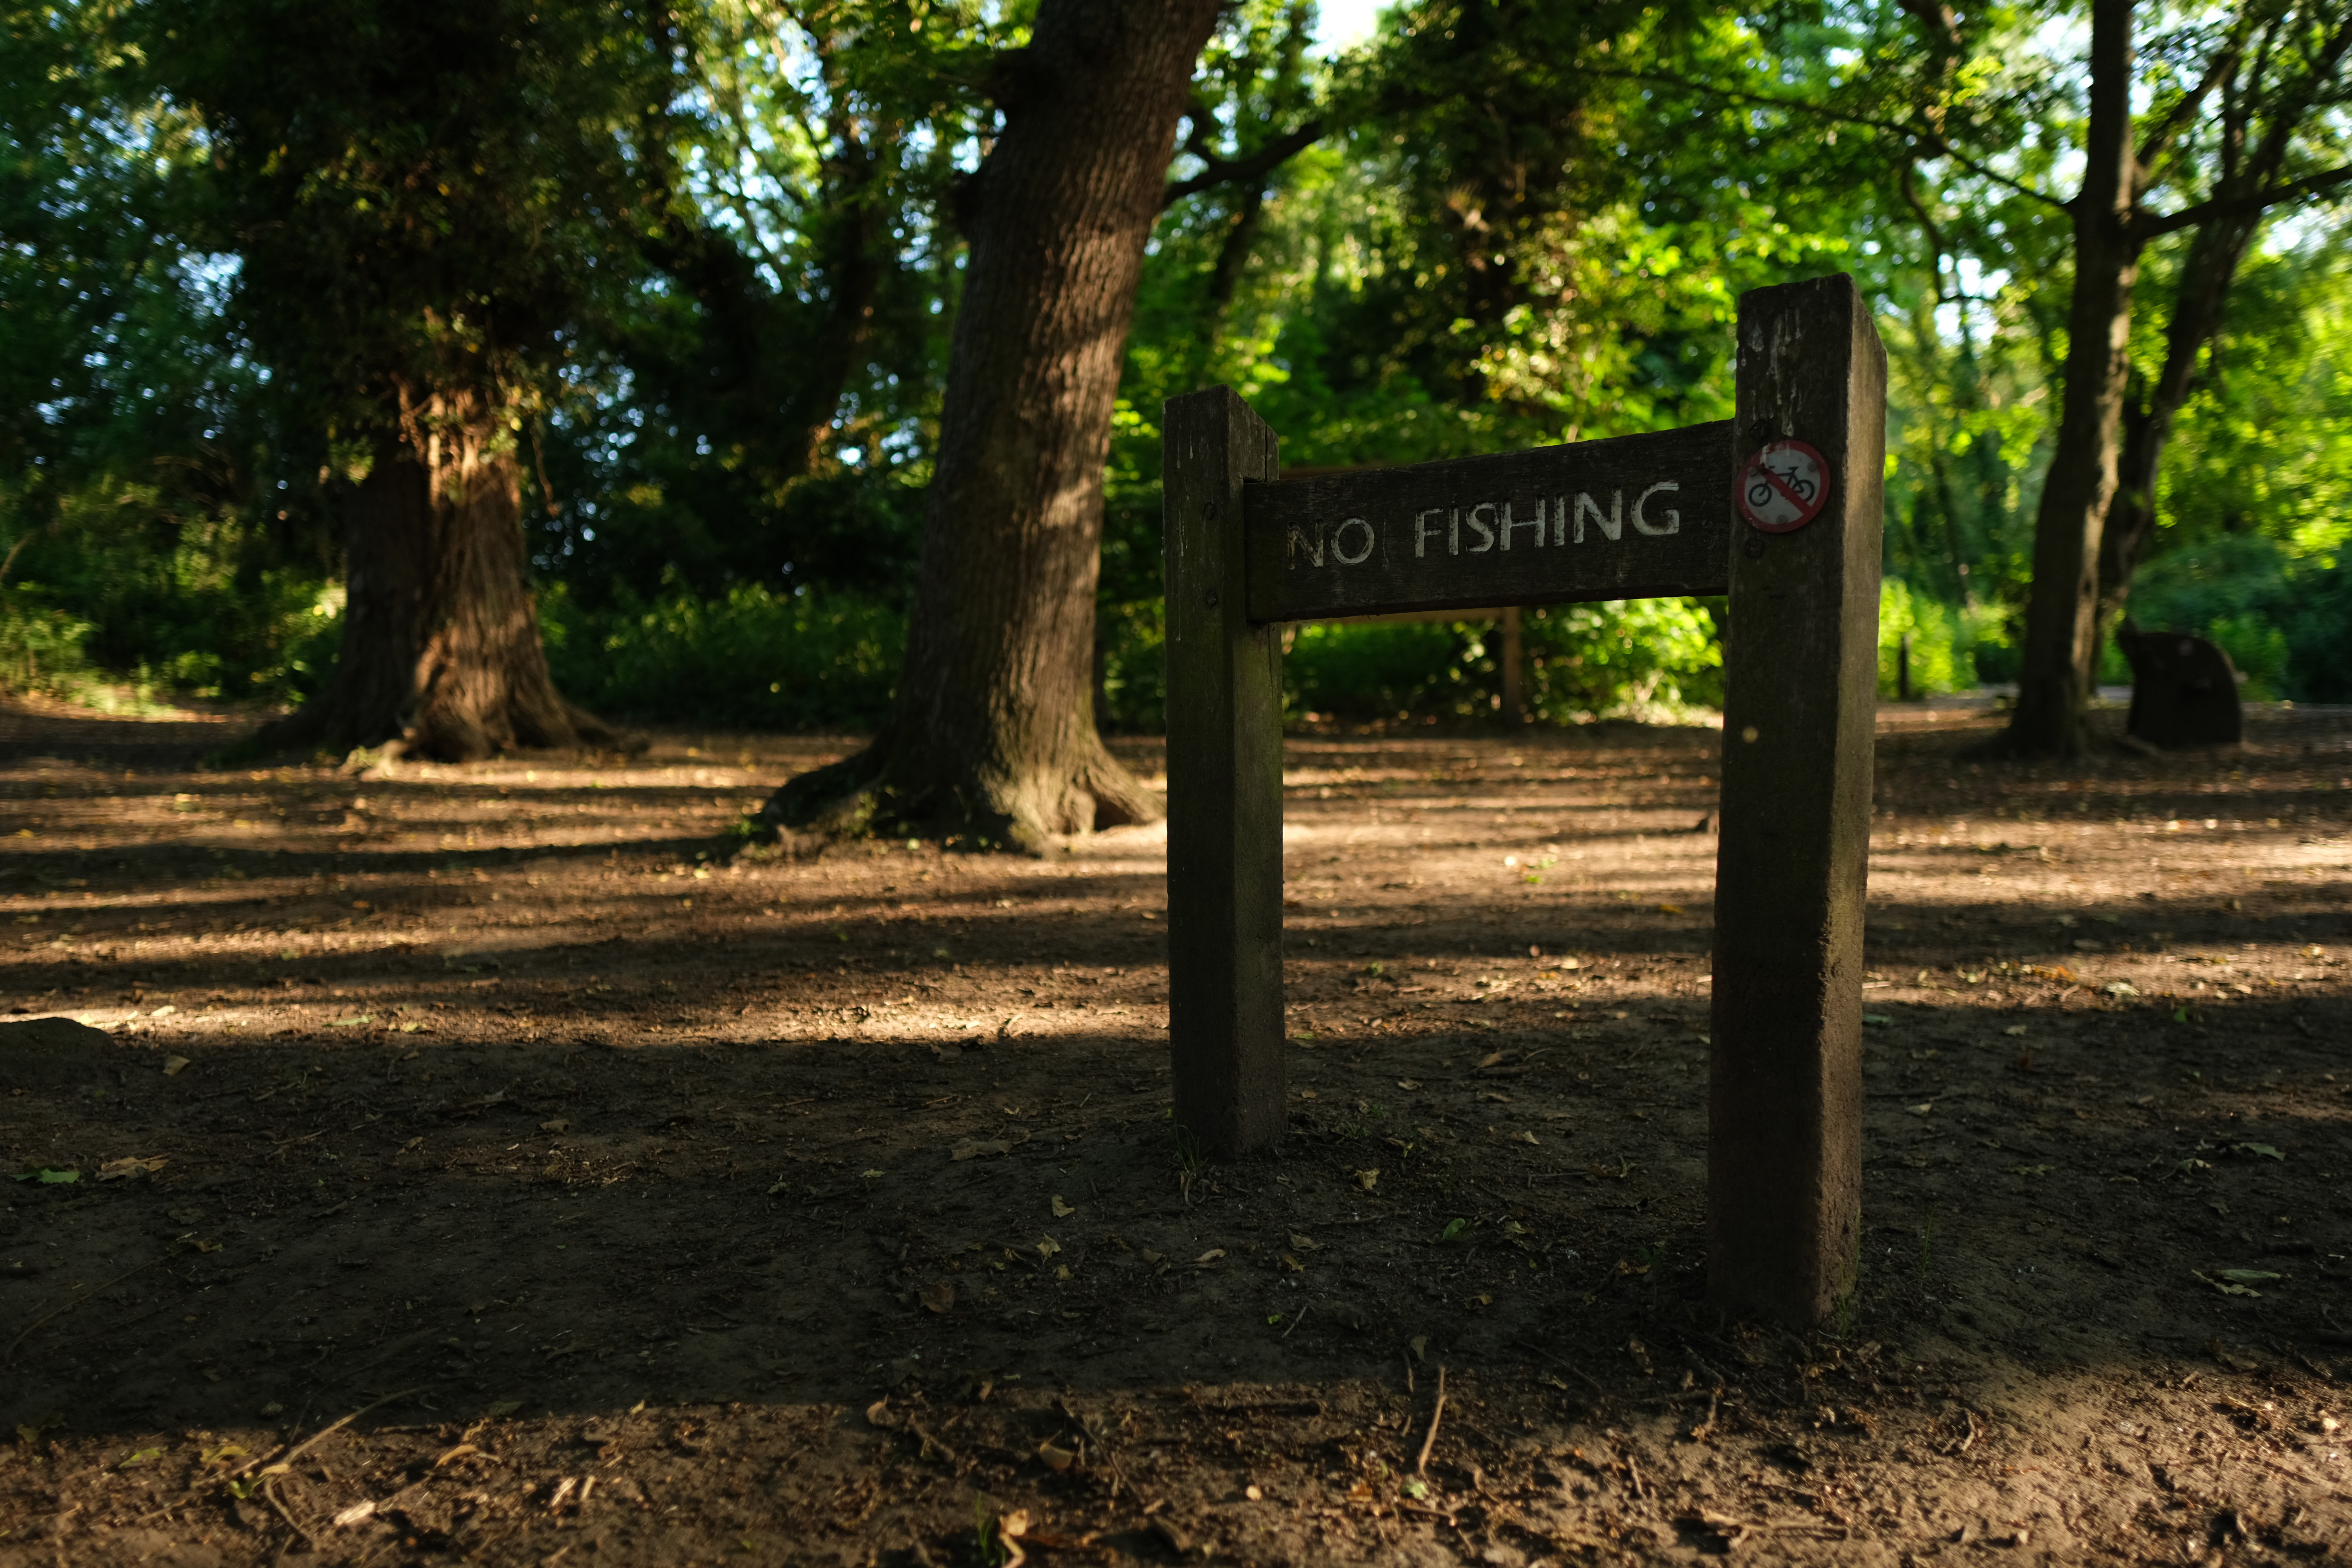 No fishing sign, Sigma 16mm, 1/680s, f/1.4, ISO400, 16mm